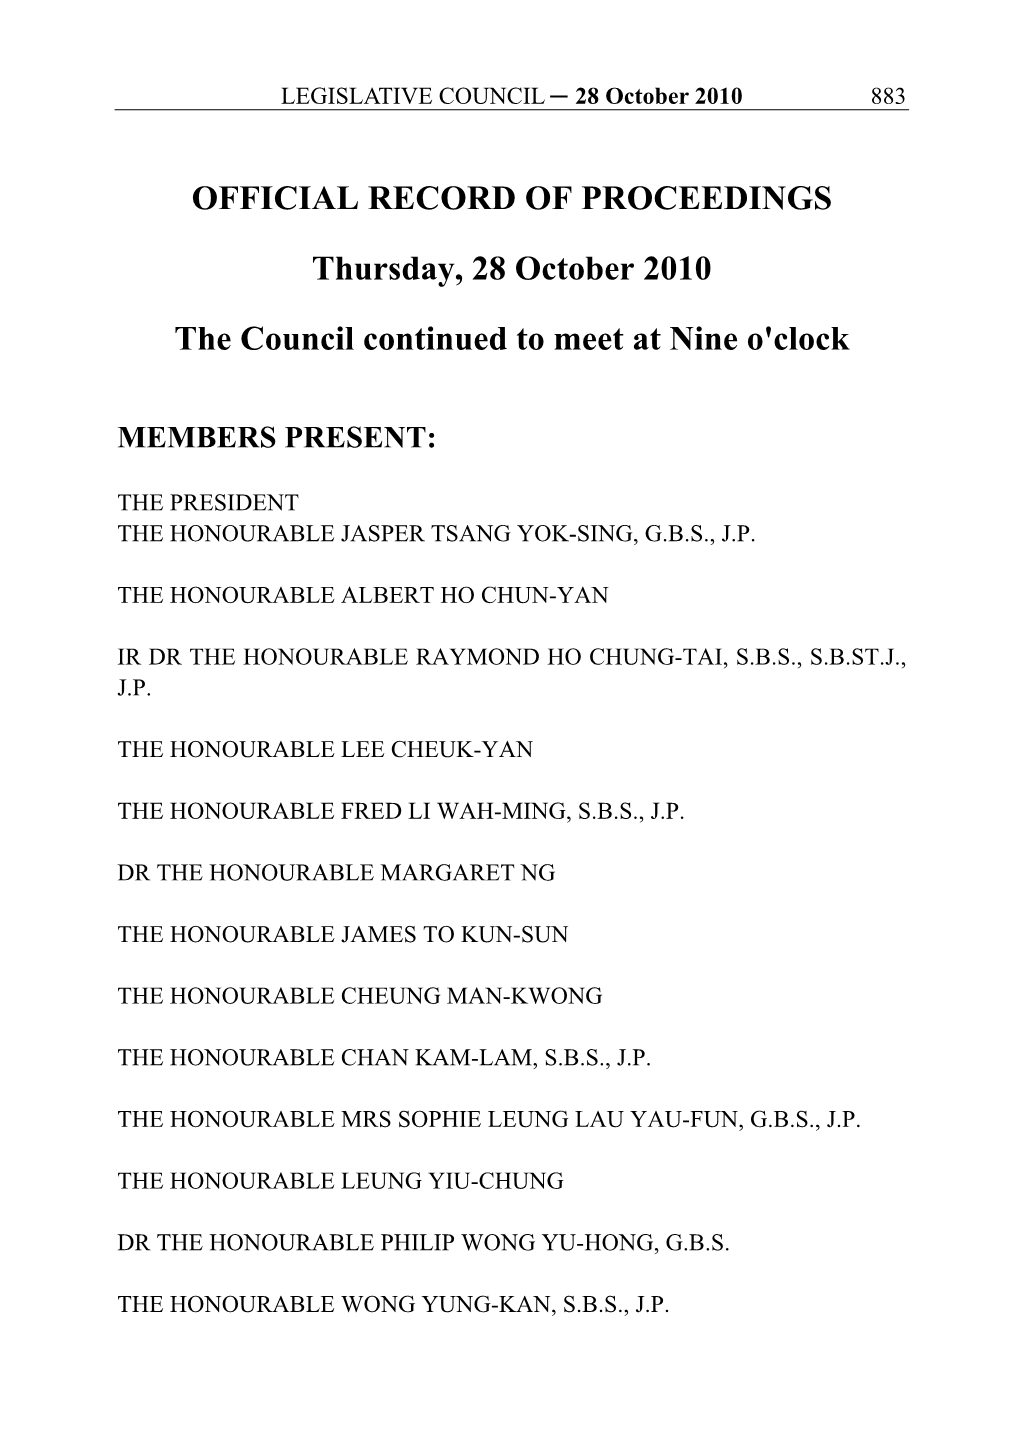 OFFICIAL RECORD of PROCEEDINGS Thursday, 28